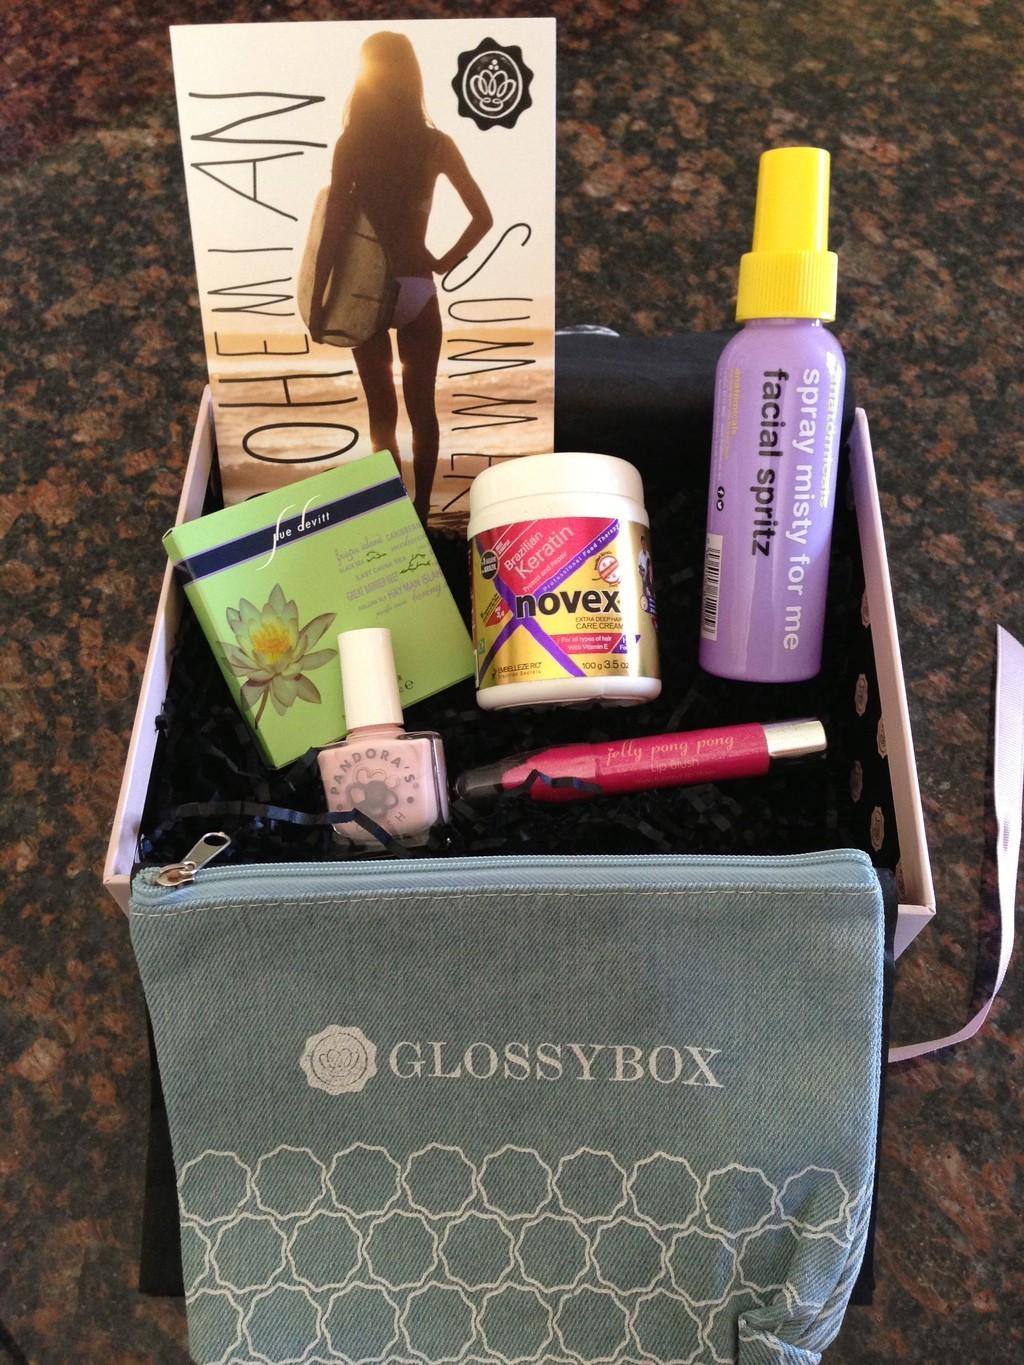 GLOSSYBOX Review + Coupon Code – August 2013